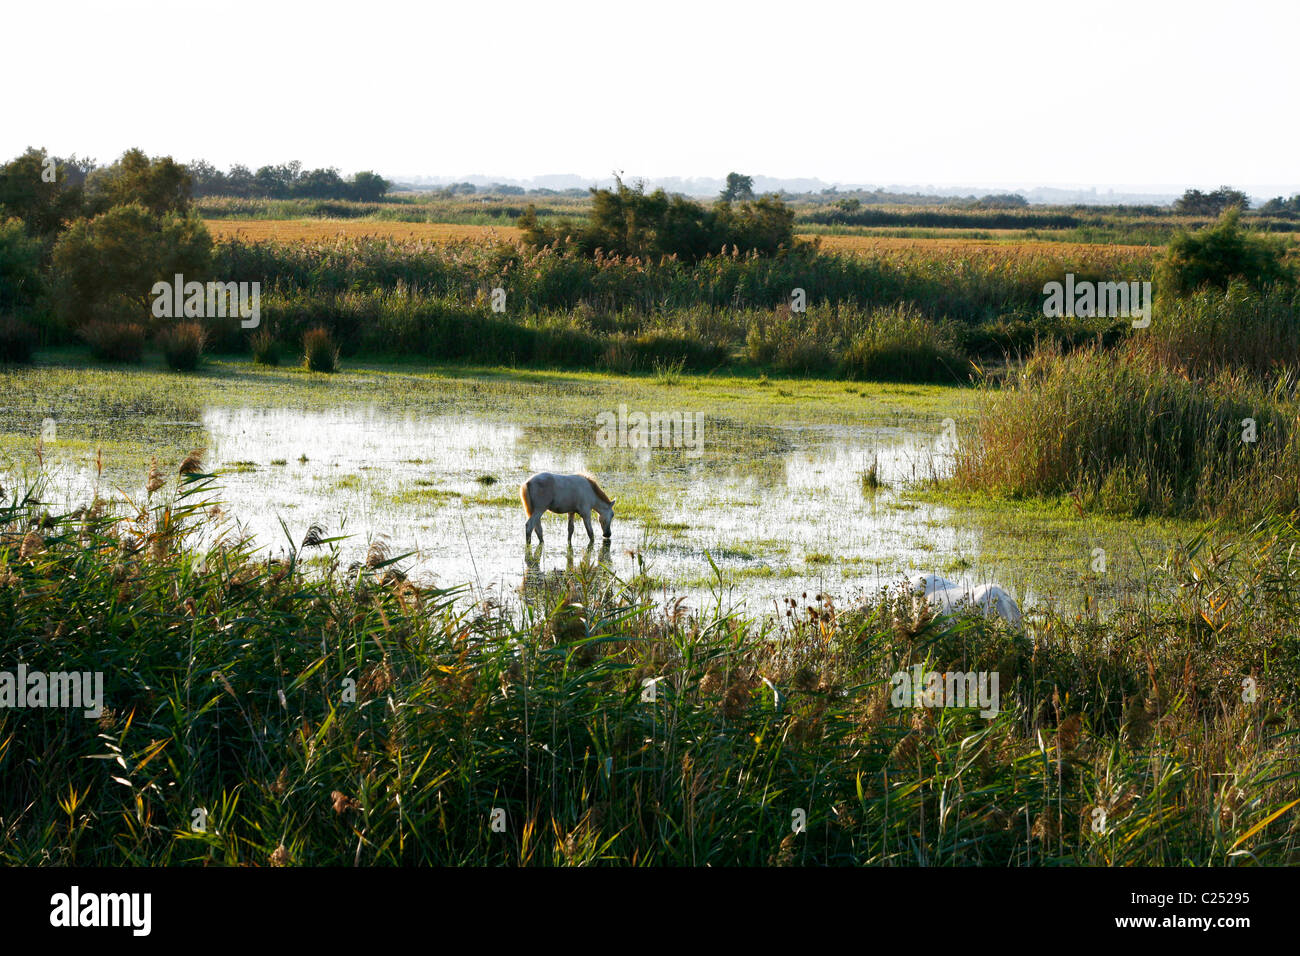 Camargue Horses in the marshes, Camargue, Provence, France. Stock Photo